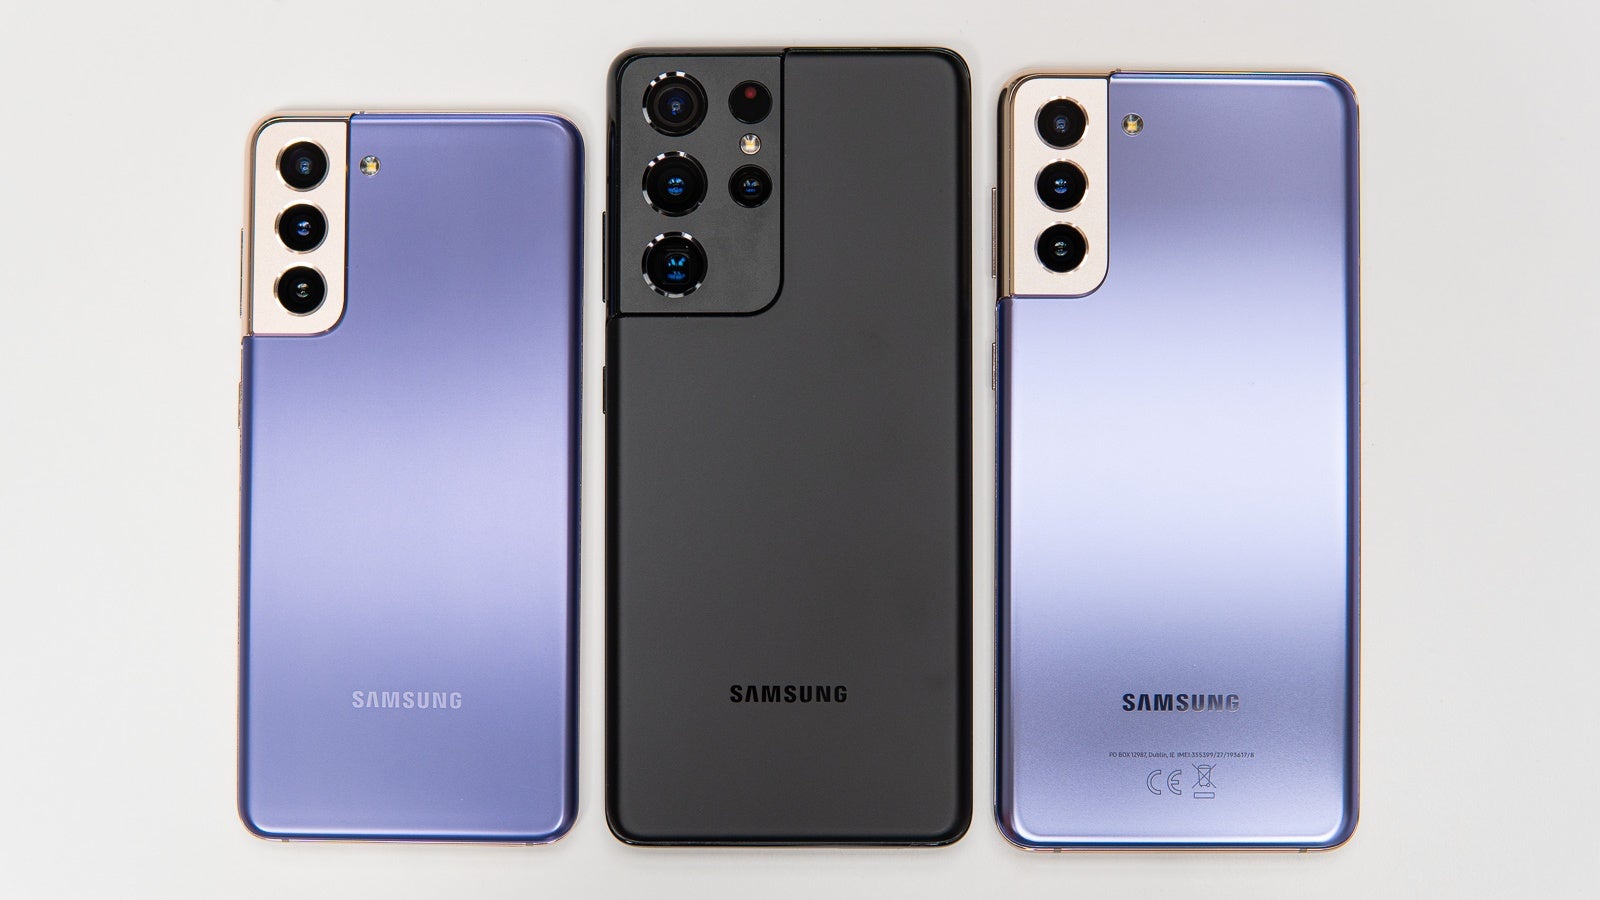 Samsung's 2022 smartphone lineup and production plans may have just